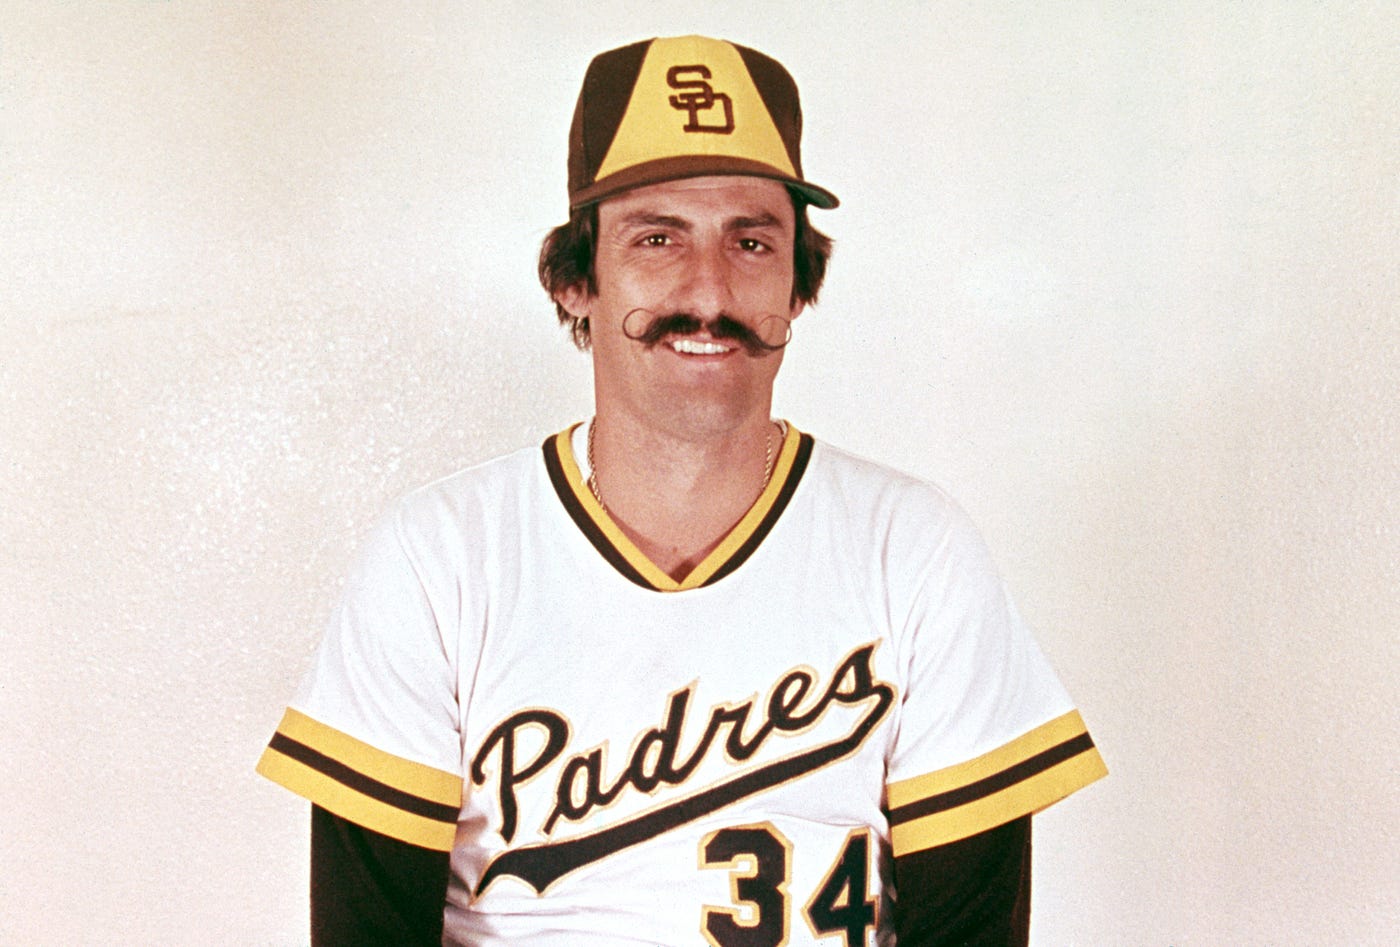 Glenn Hoffman of the San Diego Padres poses during Photo Day on